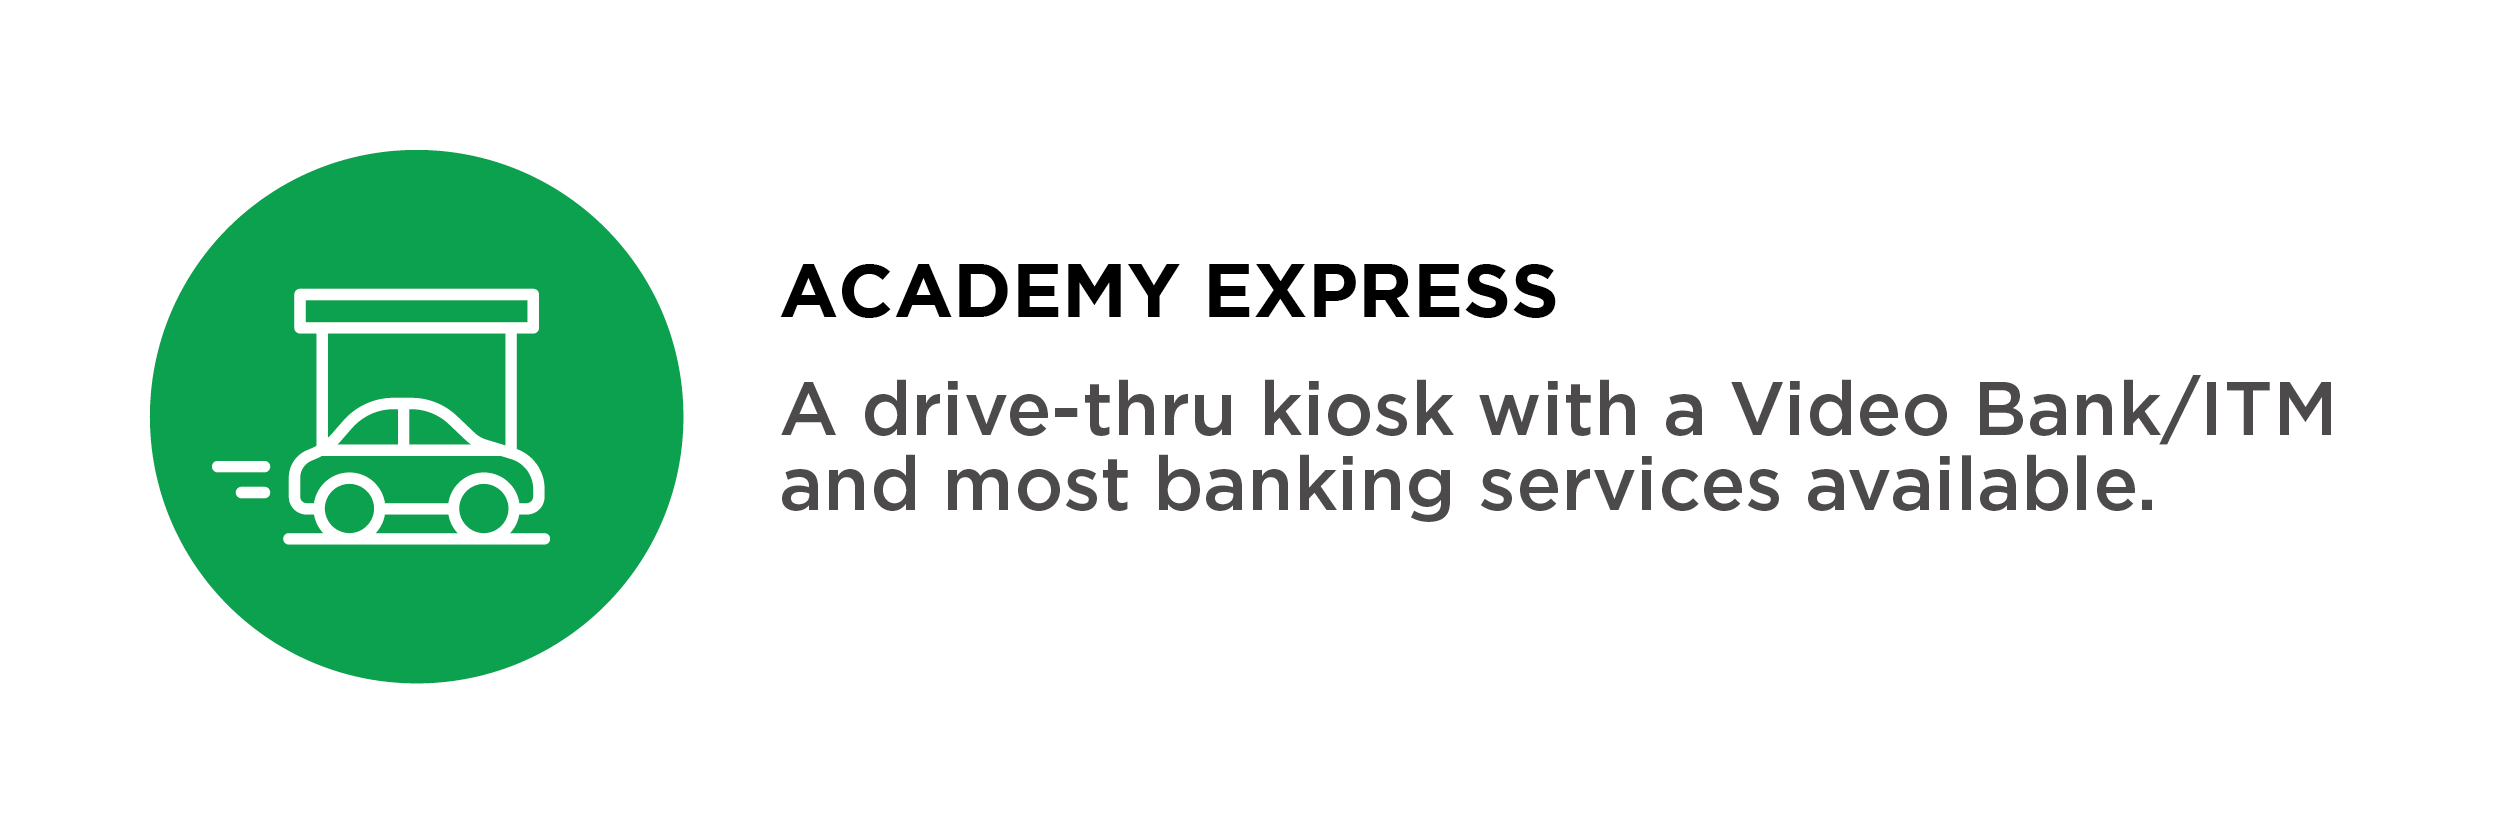 Academy Express - Video Banking and ITM services